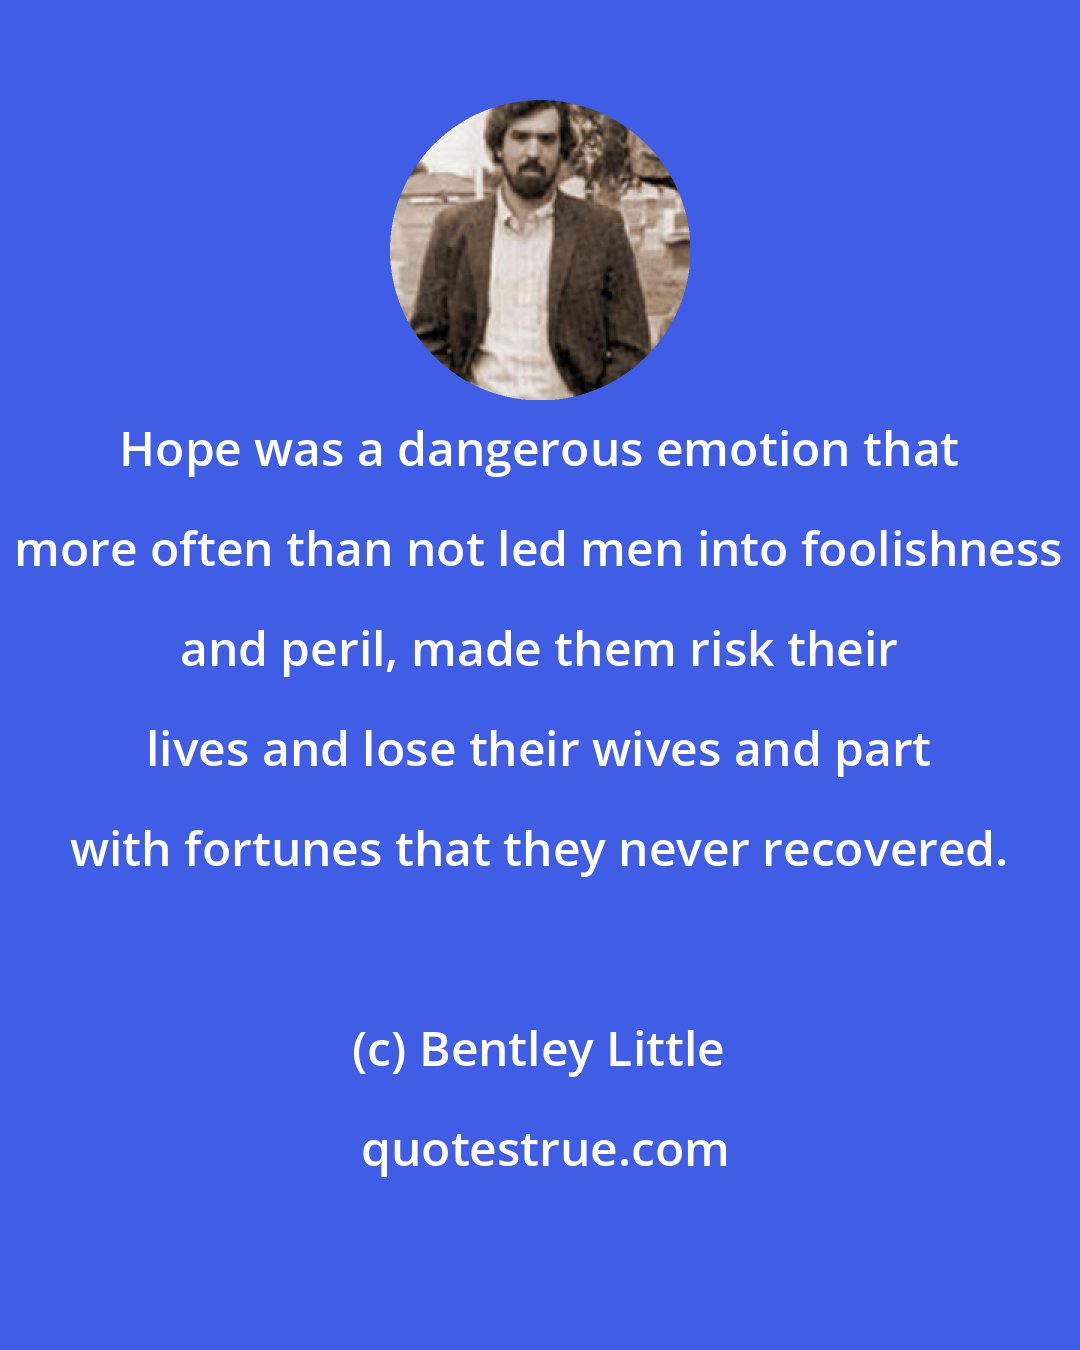 Bentley Little: Hope was a dangerous emotion that more often than not led men into foolishness and peril, made them risk their lives and lose their wives and part with fortunes that they never recovered.